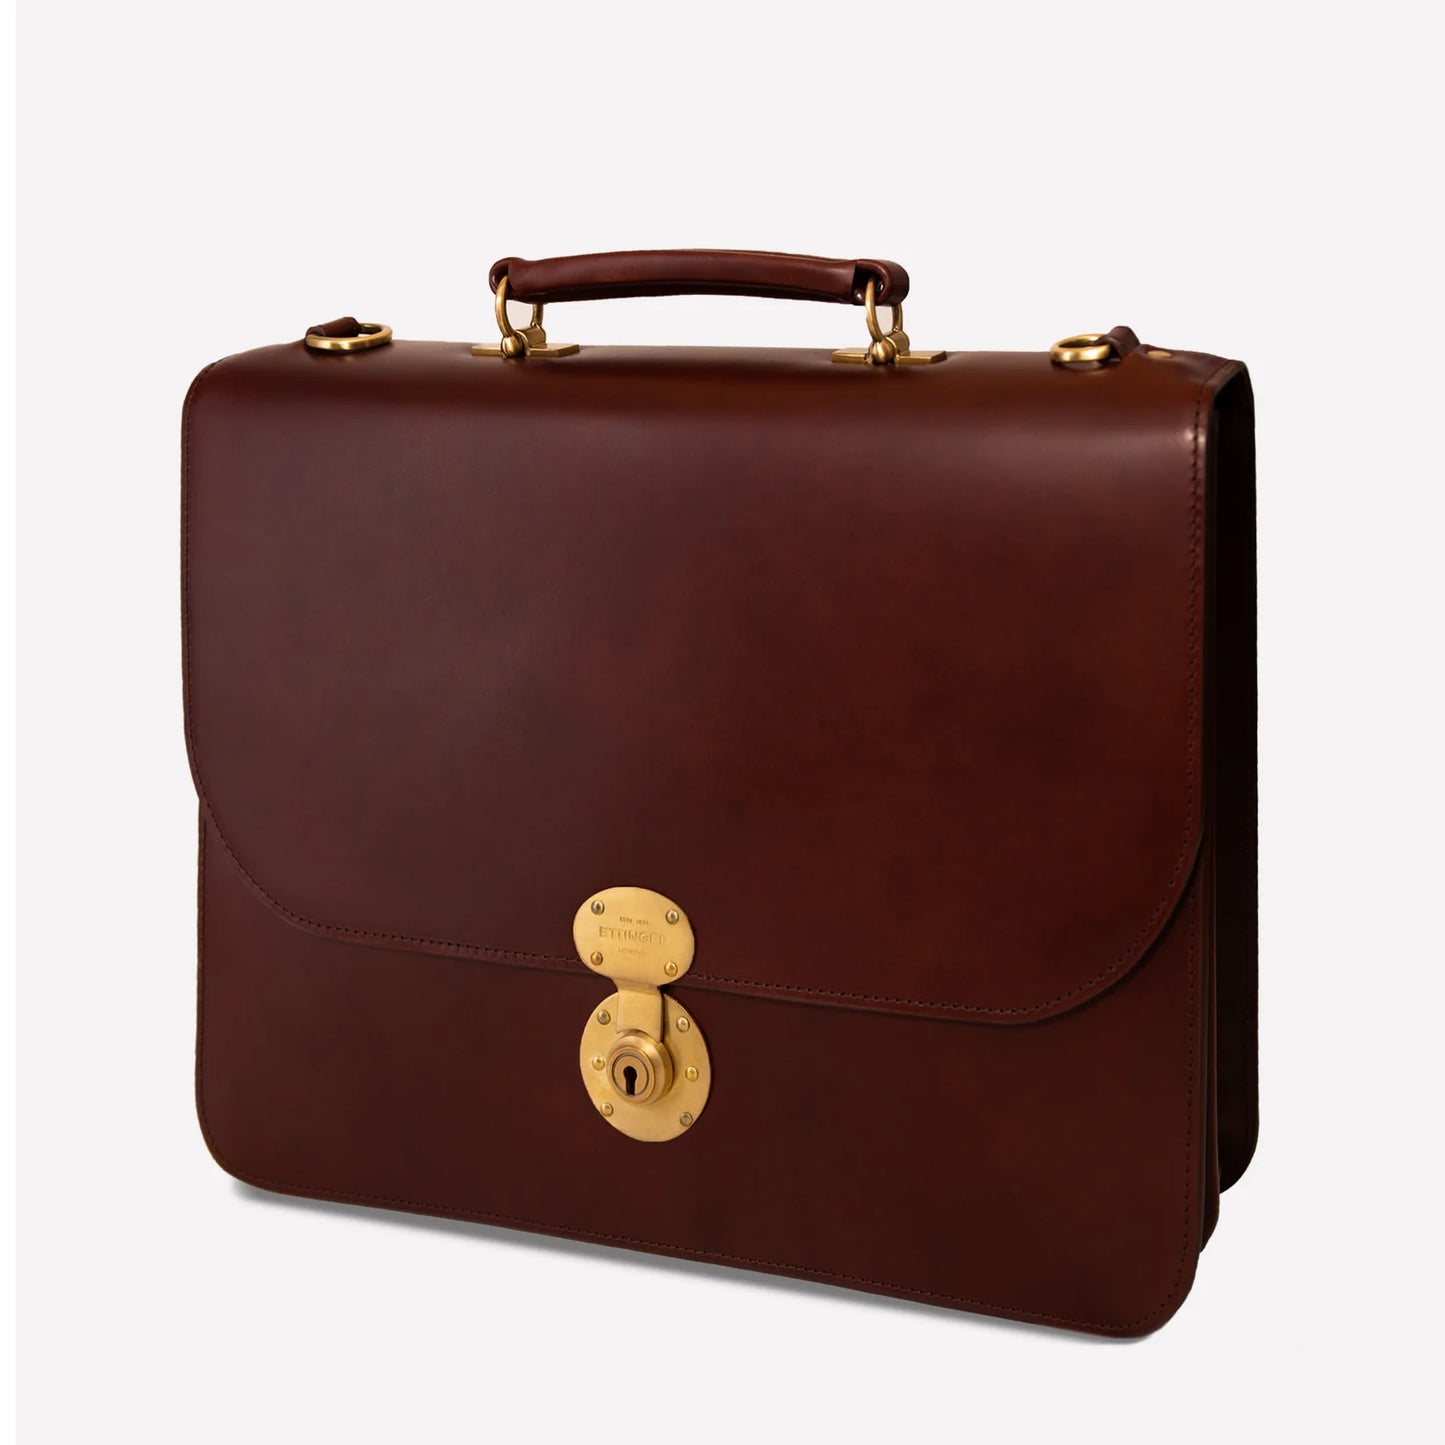 ETR HERITAGE WESTMINSTER Flap-Over Briefcase